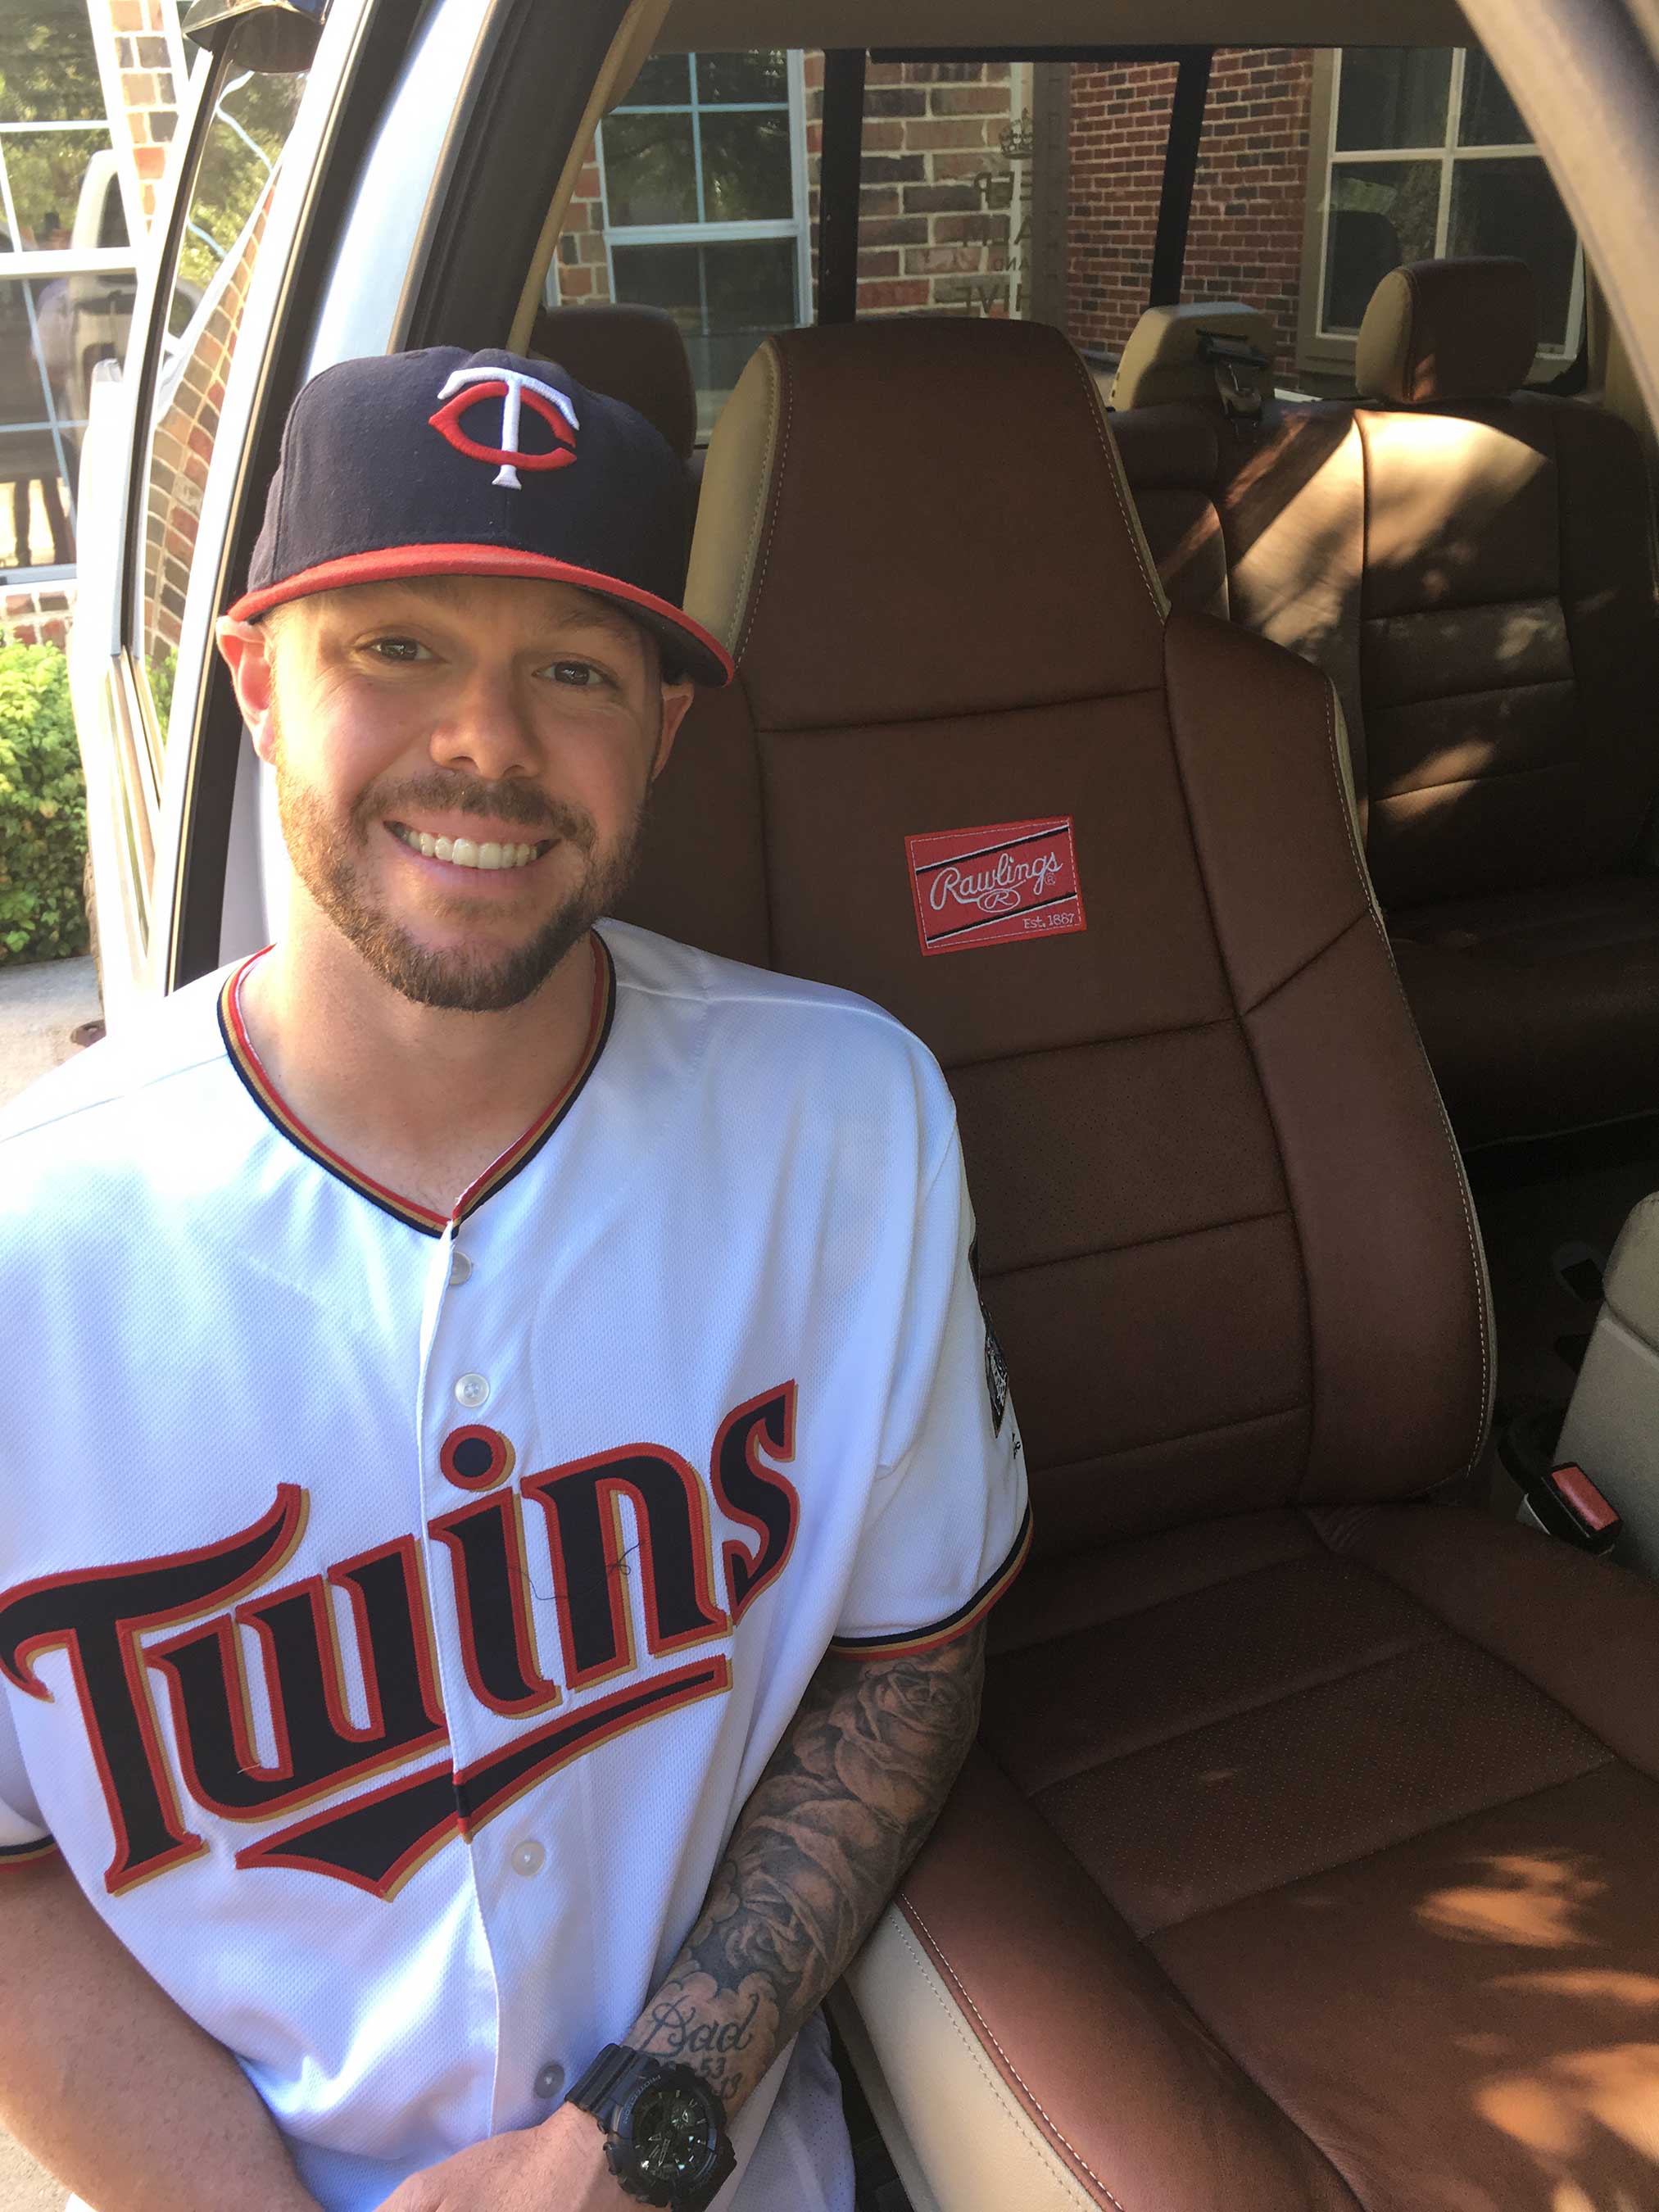 MLB Player and Minnesota Twins Pitcher Ryan Pressley updated his 2008 F-250 truck with Katkzin’s Rawlings leather interior package – an example of how personal choices keep a daily driving vehicle fresh and new.